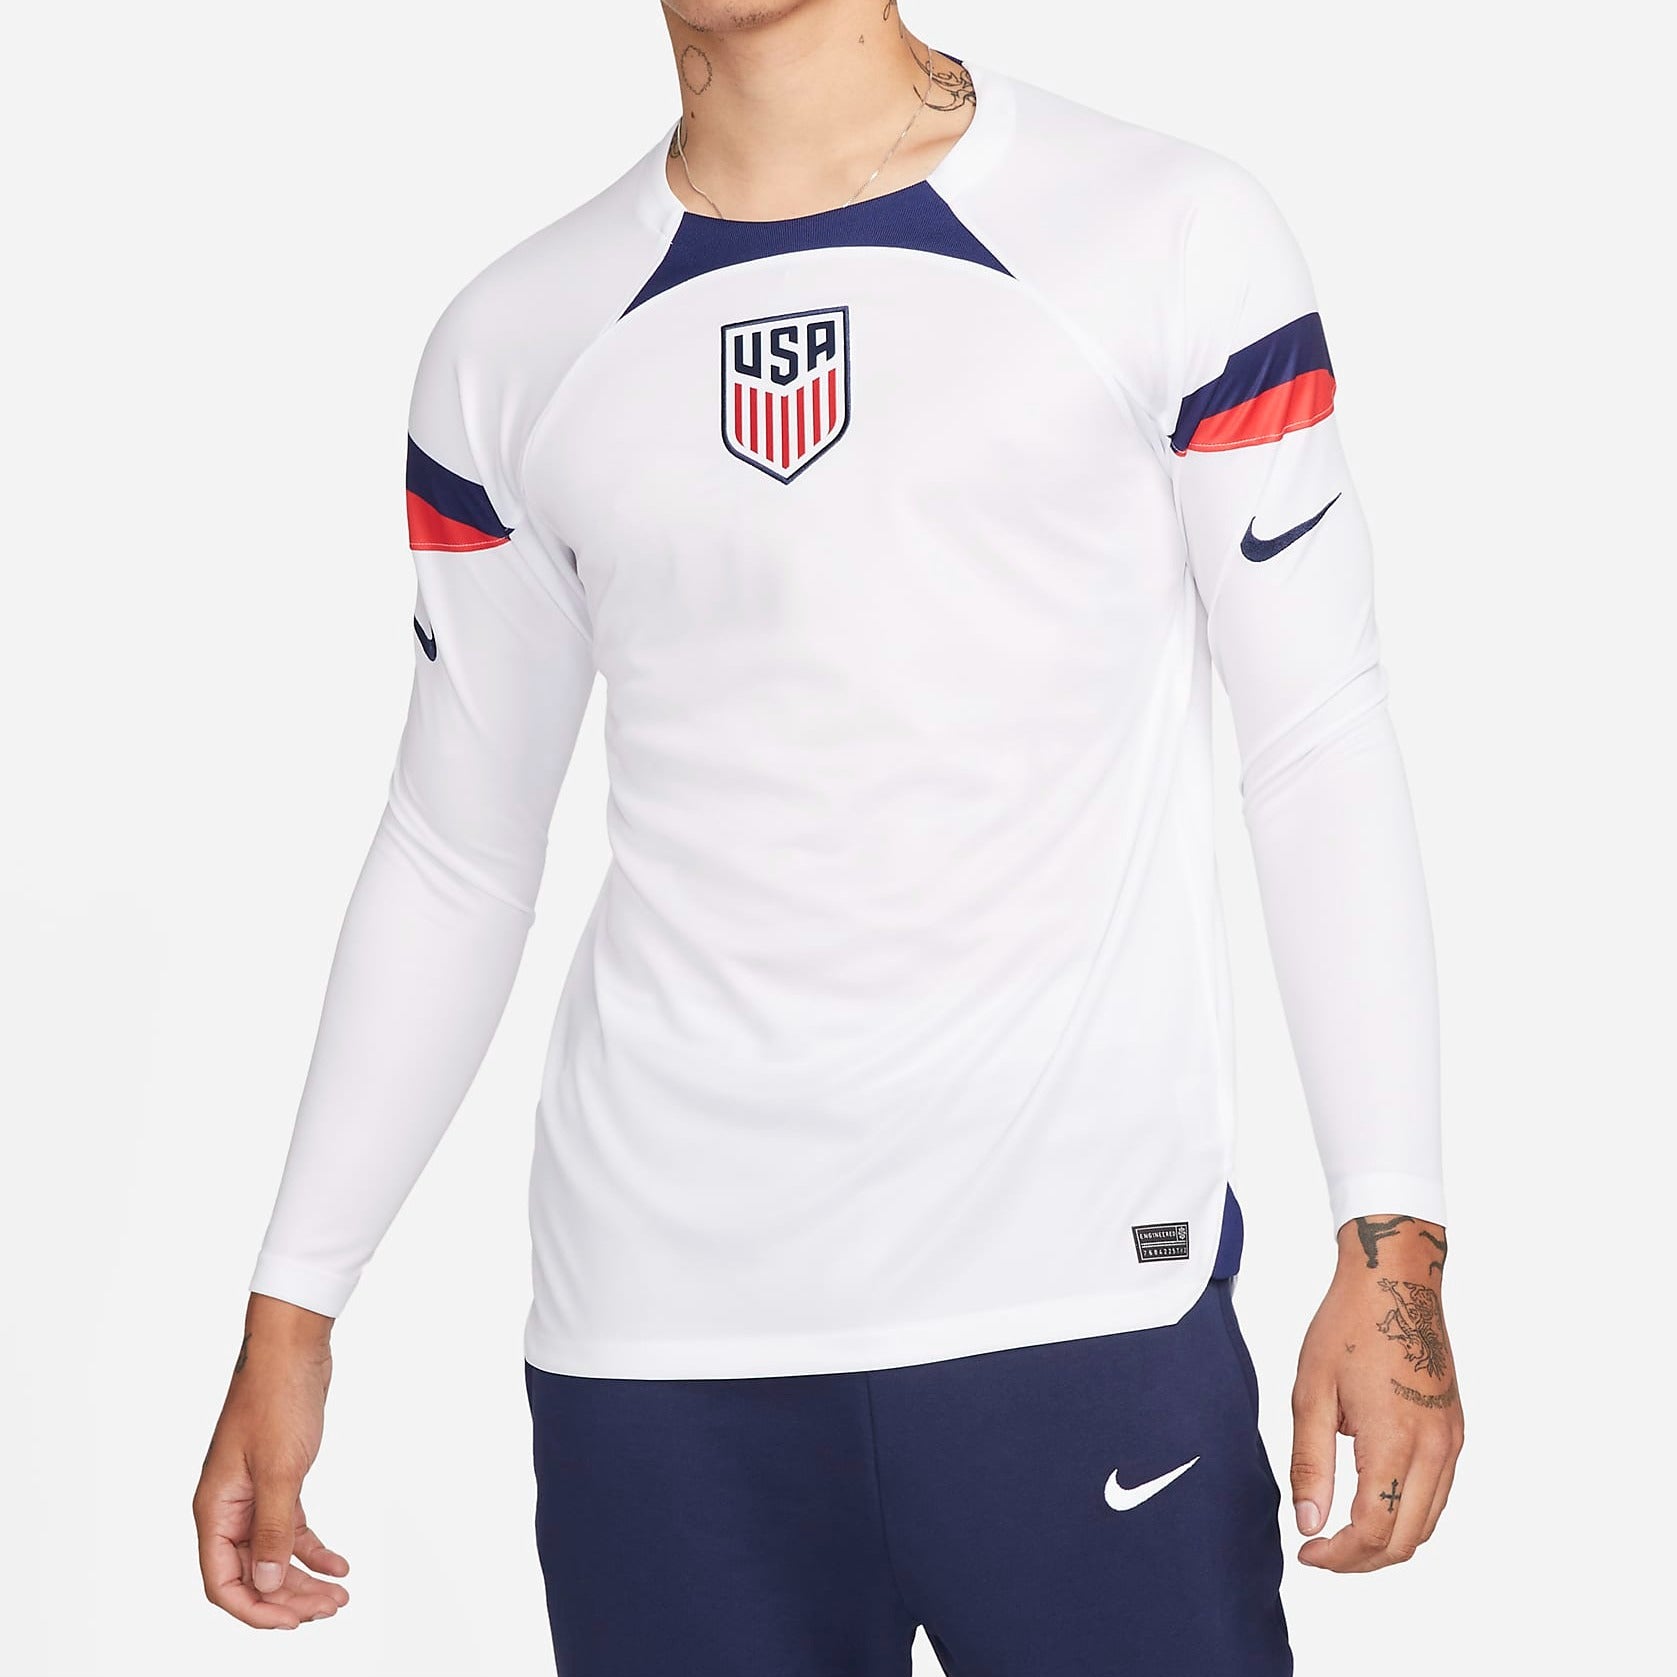 us national team world cup jersey